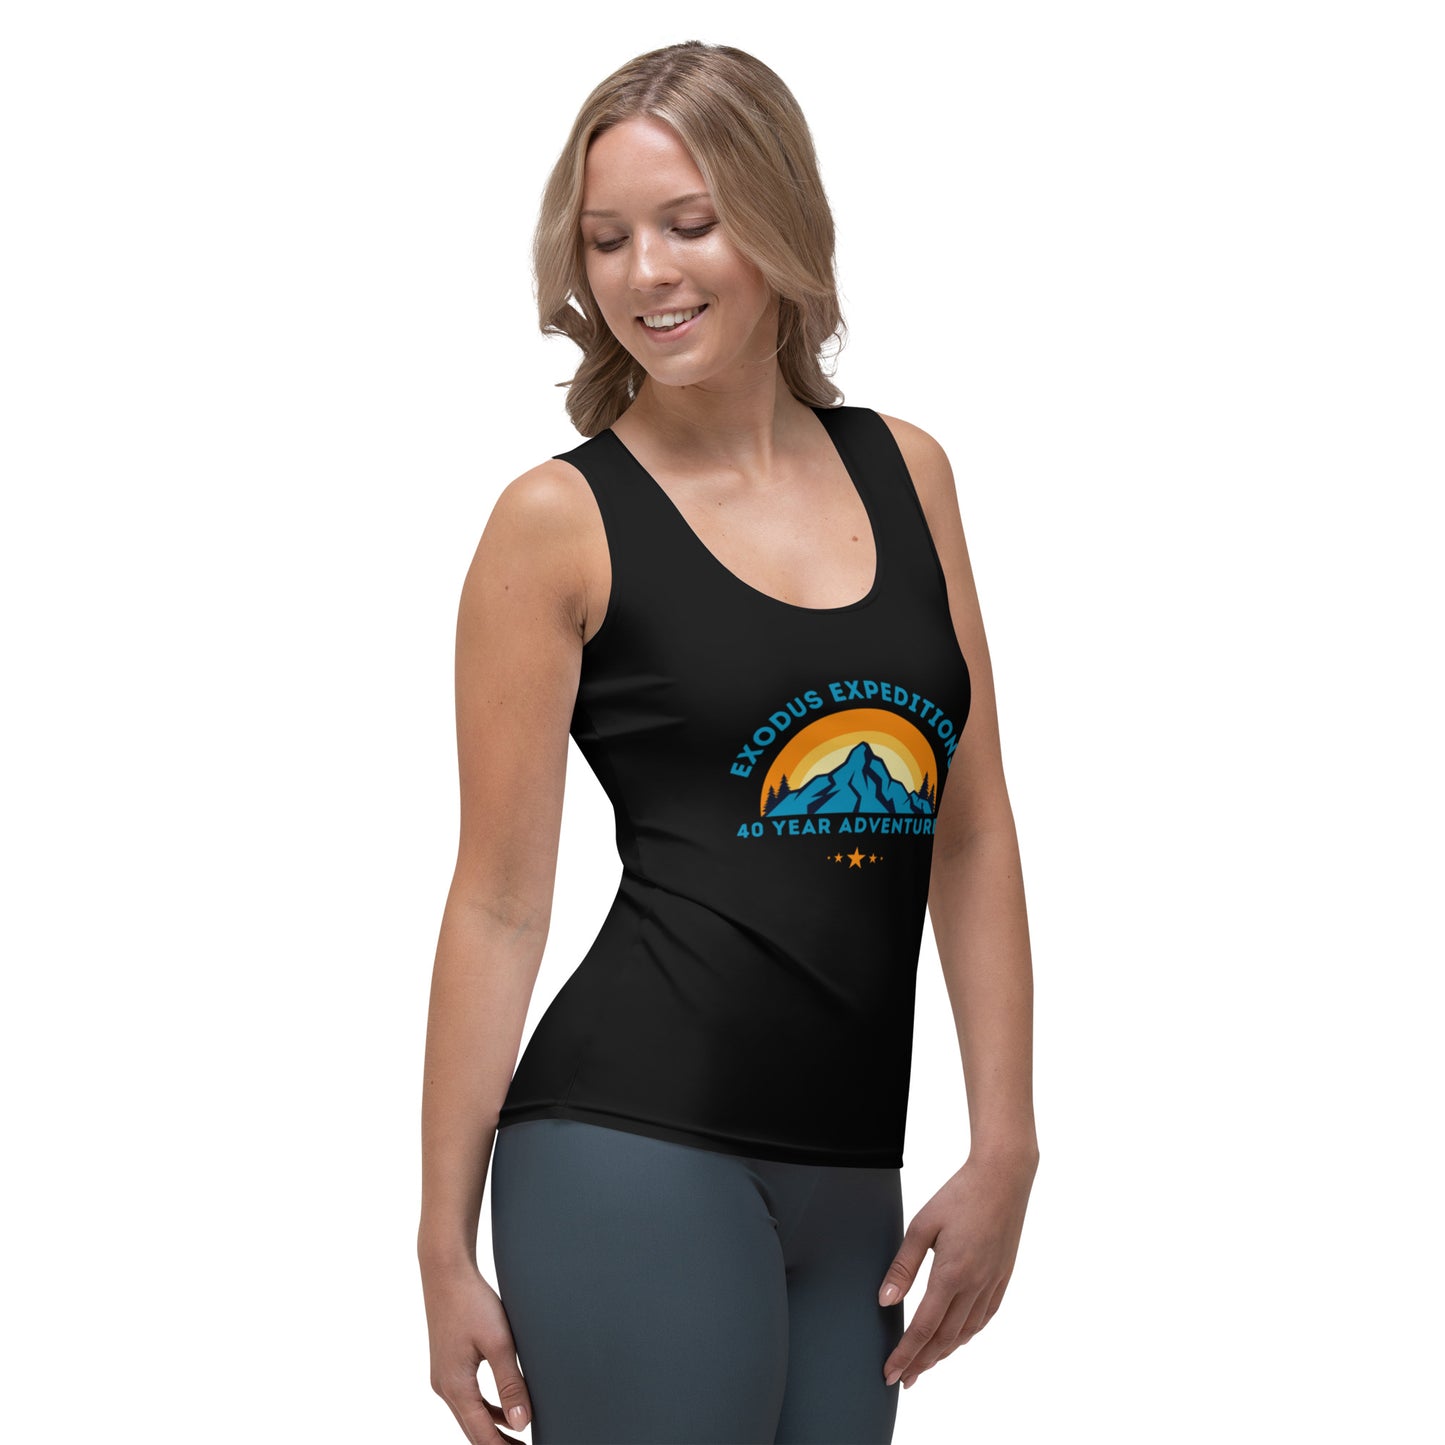 EXODUS EXPEDITIONS 40 Year Adventures Sublimation Cut & Sew Tank Top